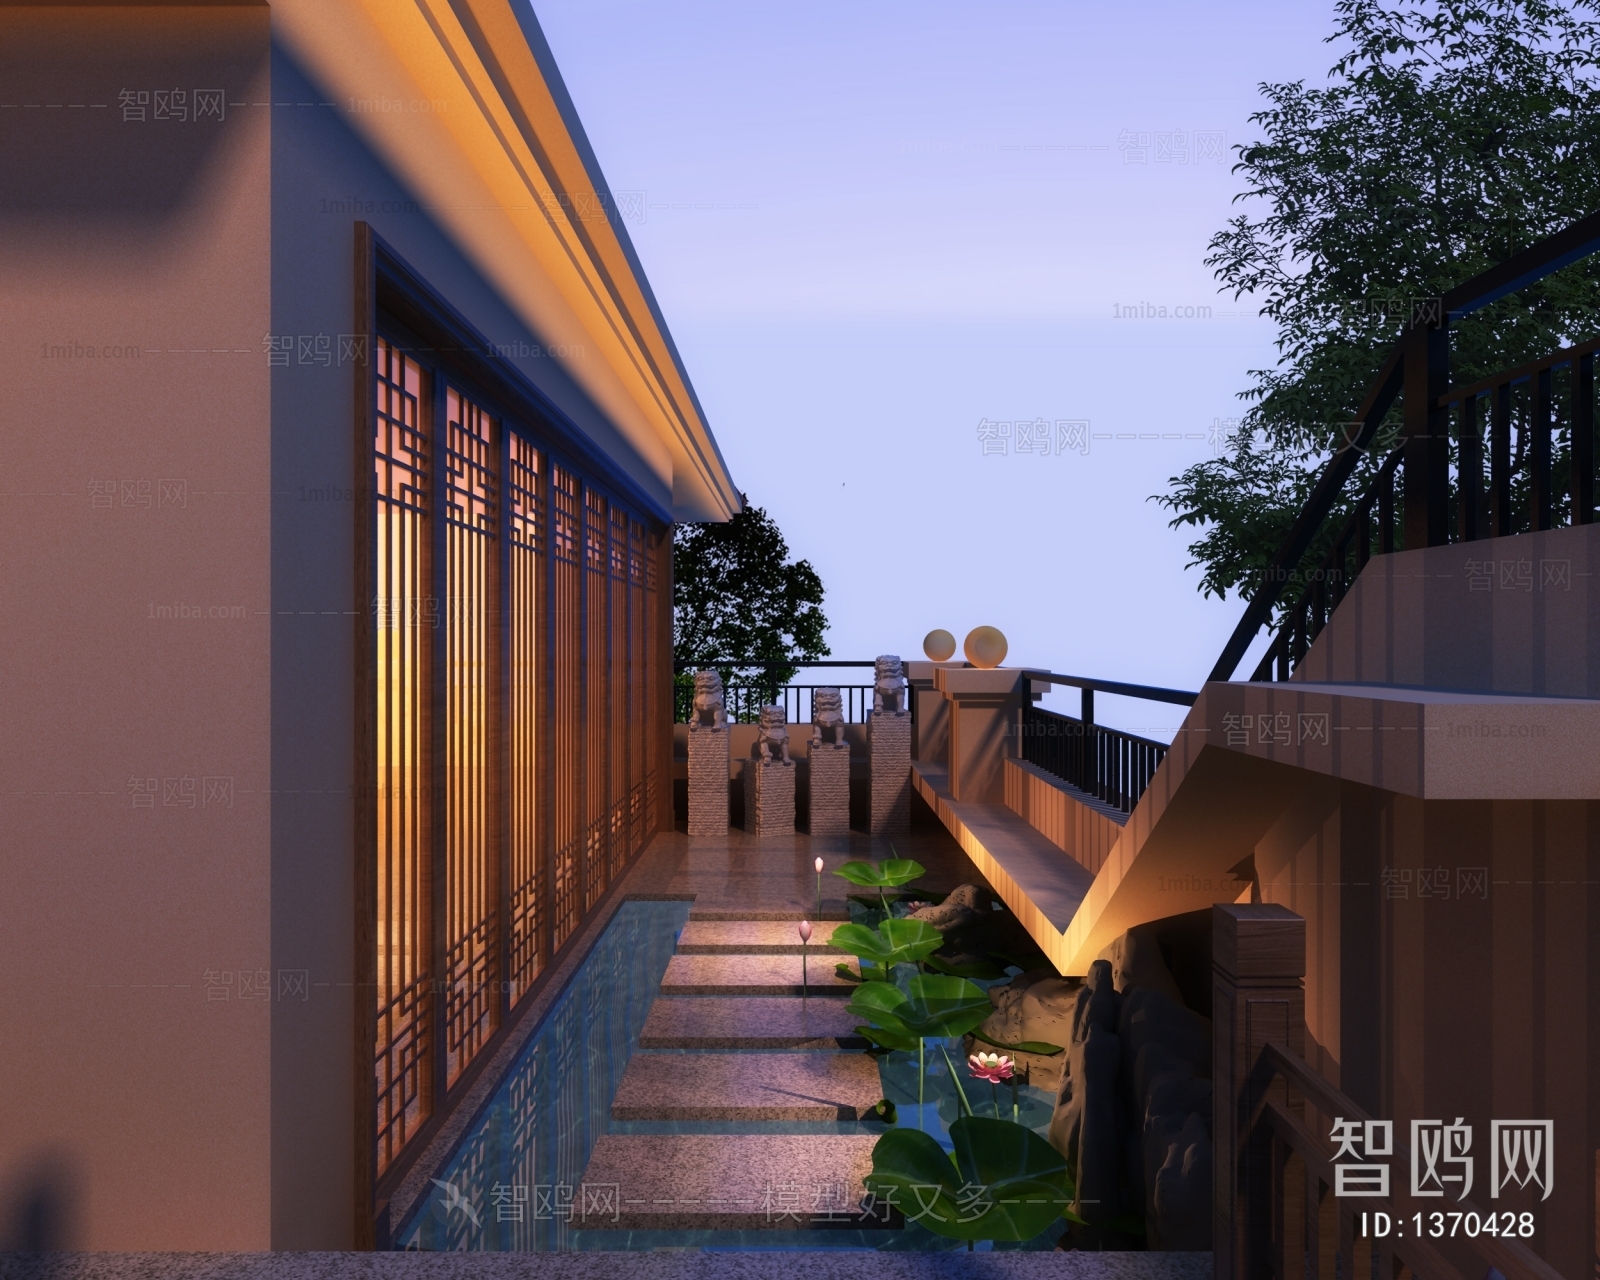 New Classical Style Courtyard/landscape